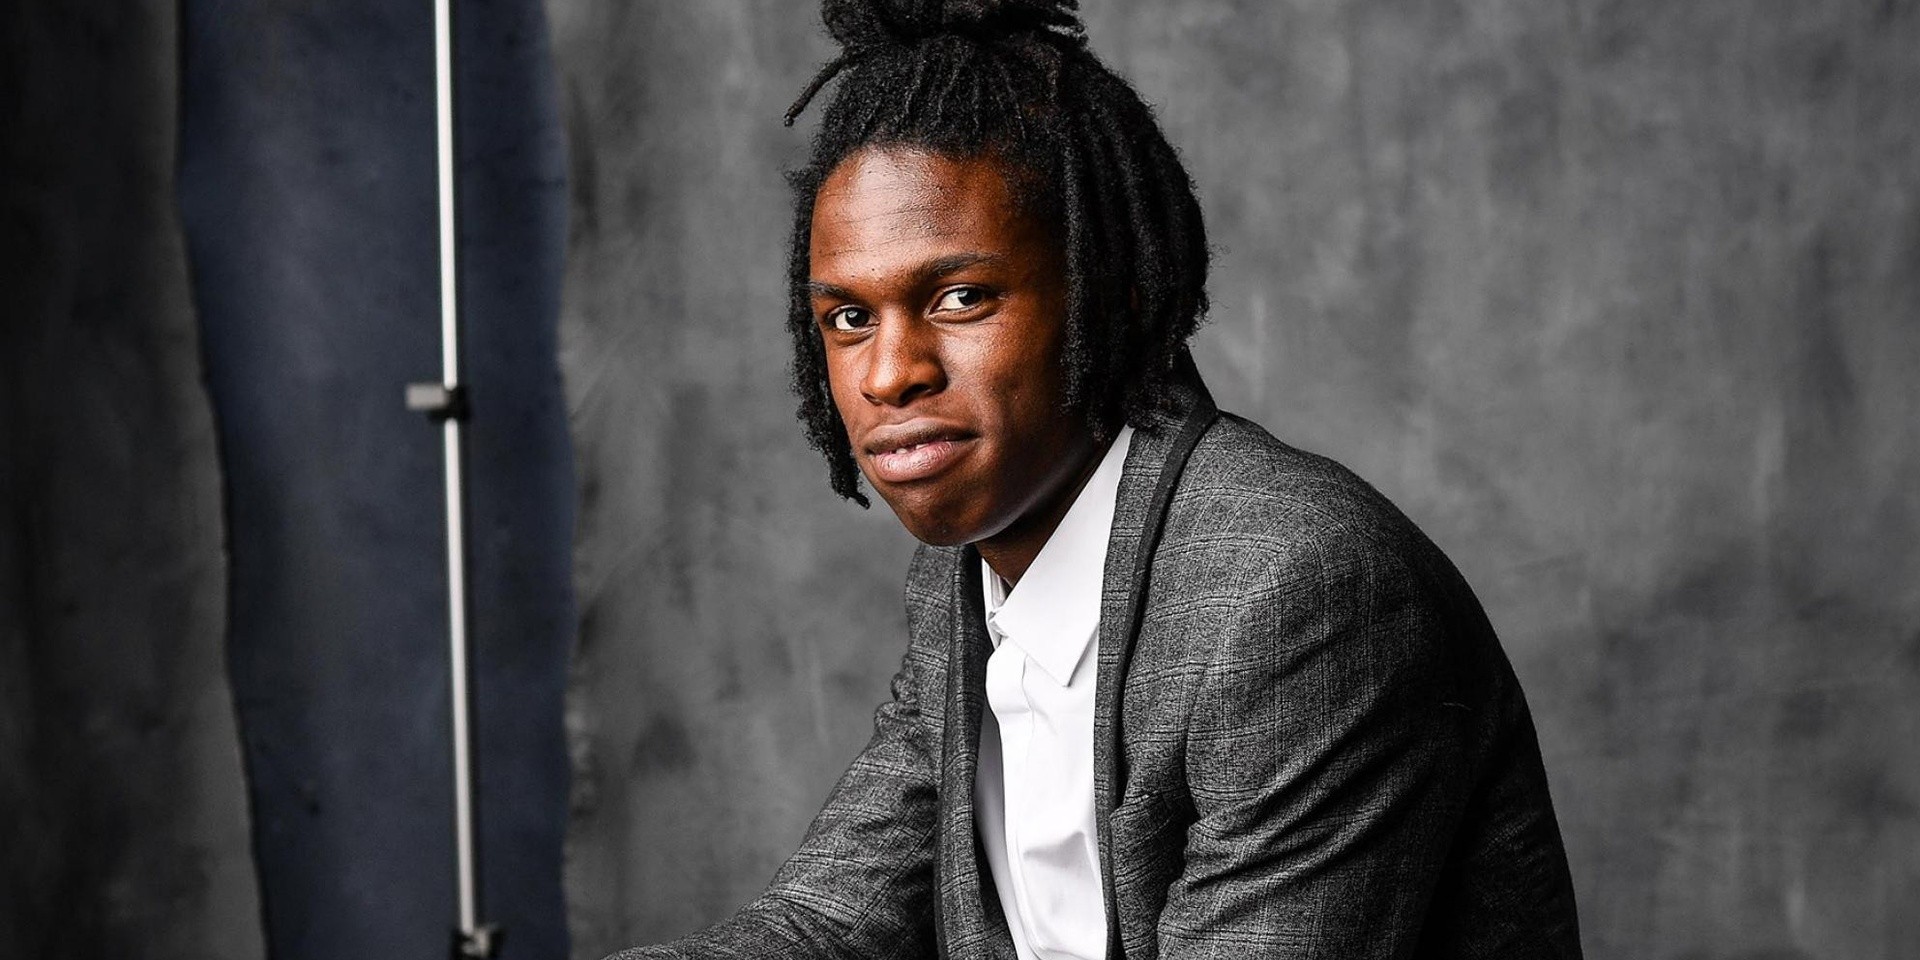 Daniel Caesar's second Singapore show is now sold out as well